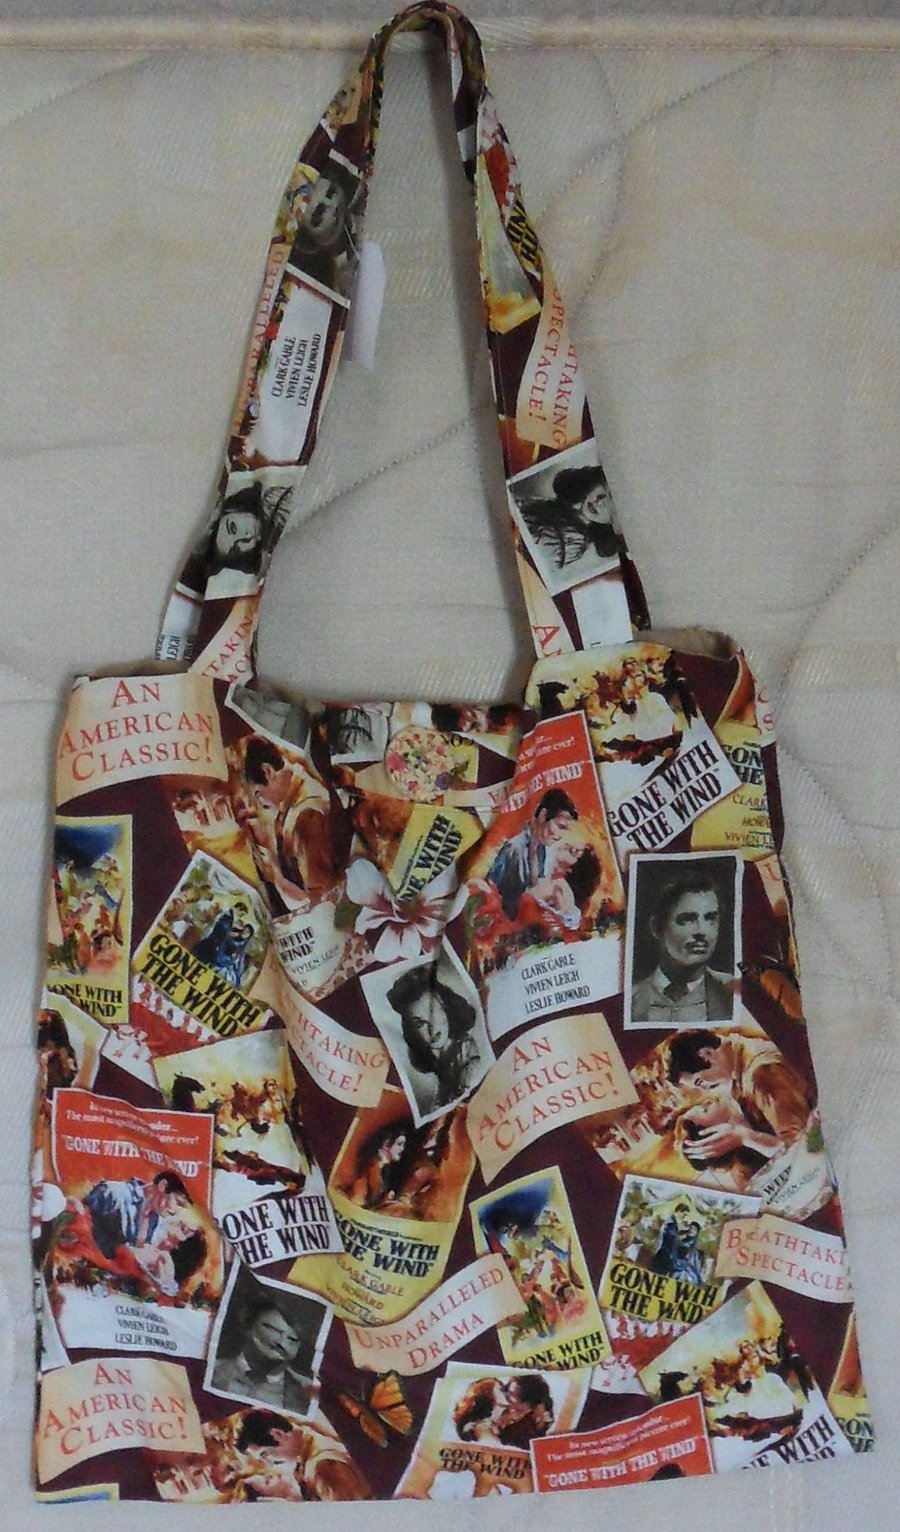 Homemade Totebag. Gone with the wind design. Lined.  100% cotton fabric